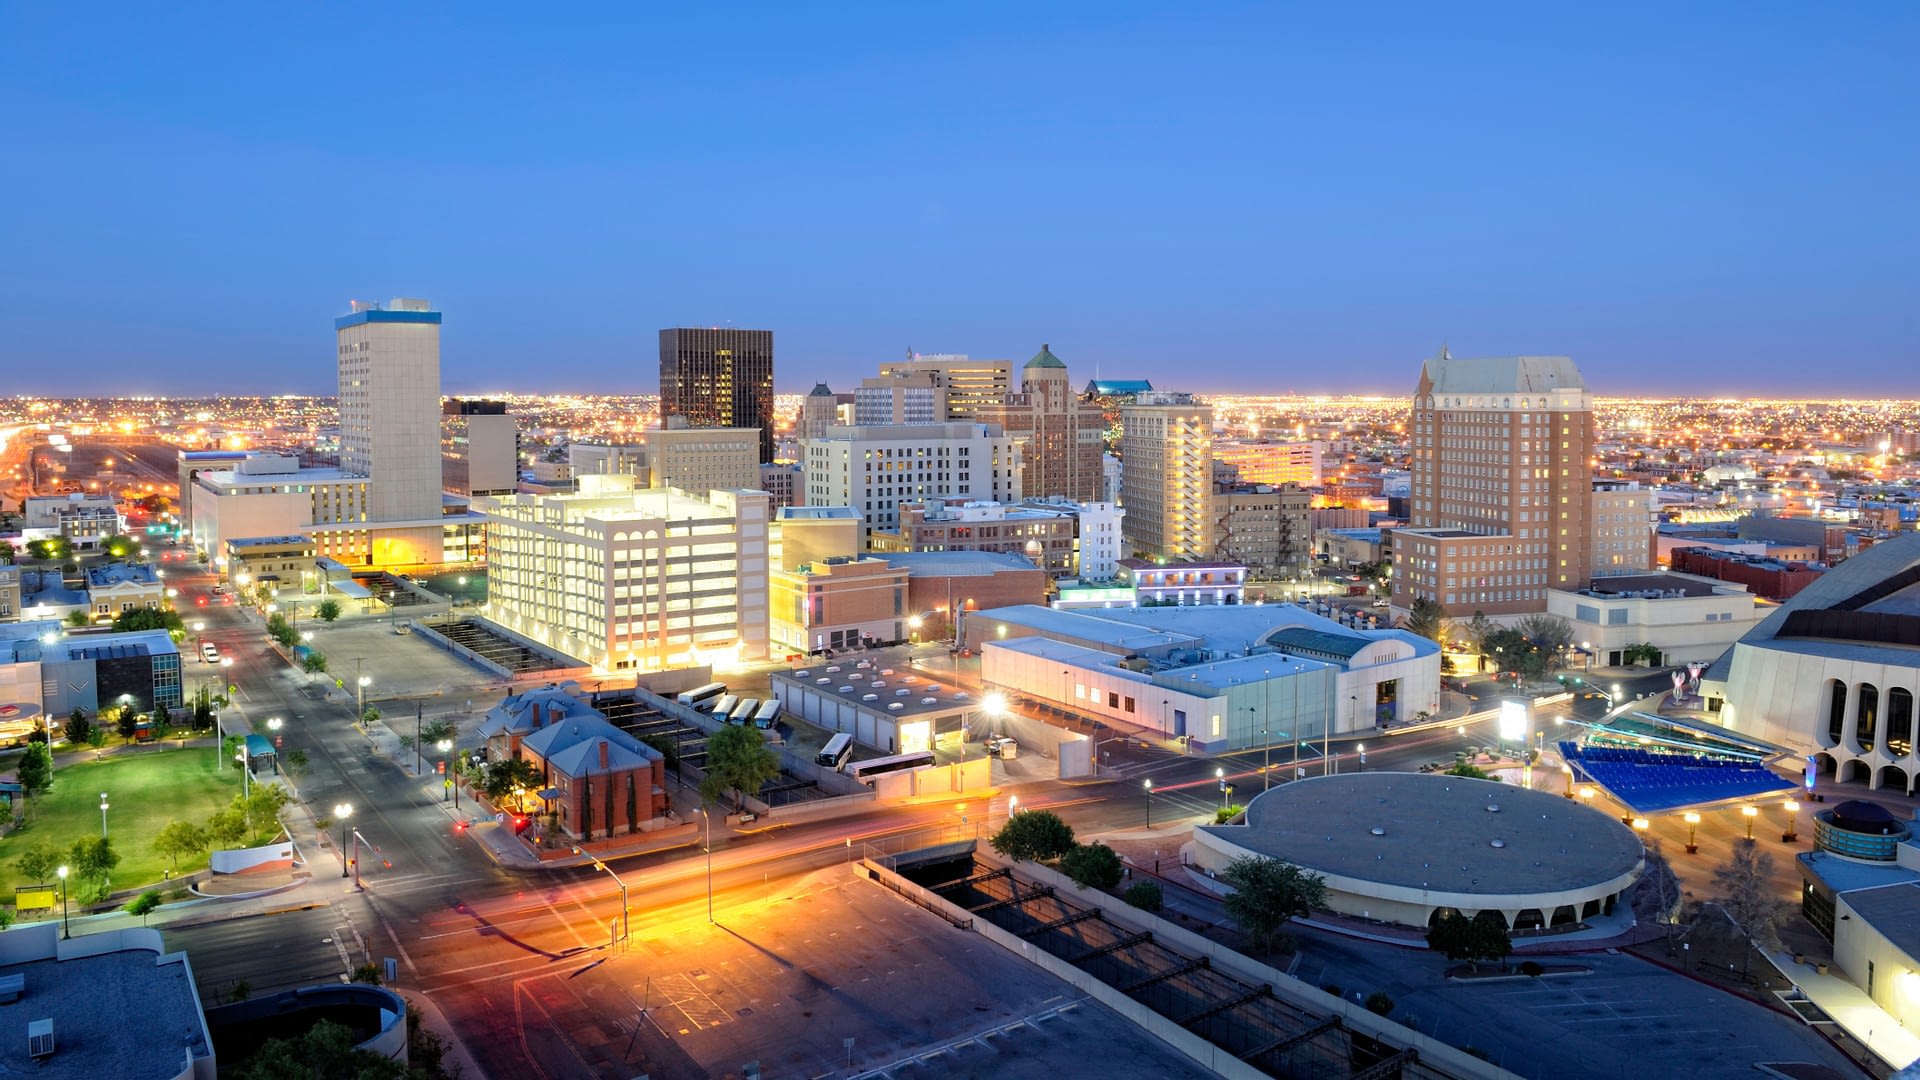 El Paso reports US$30 million surplus for fiscal year 2021